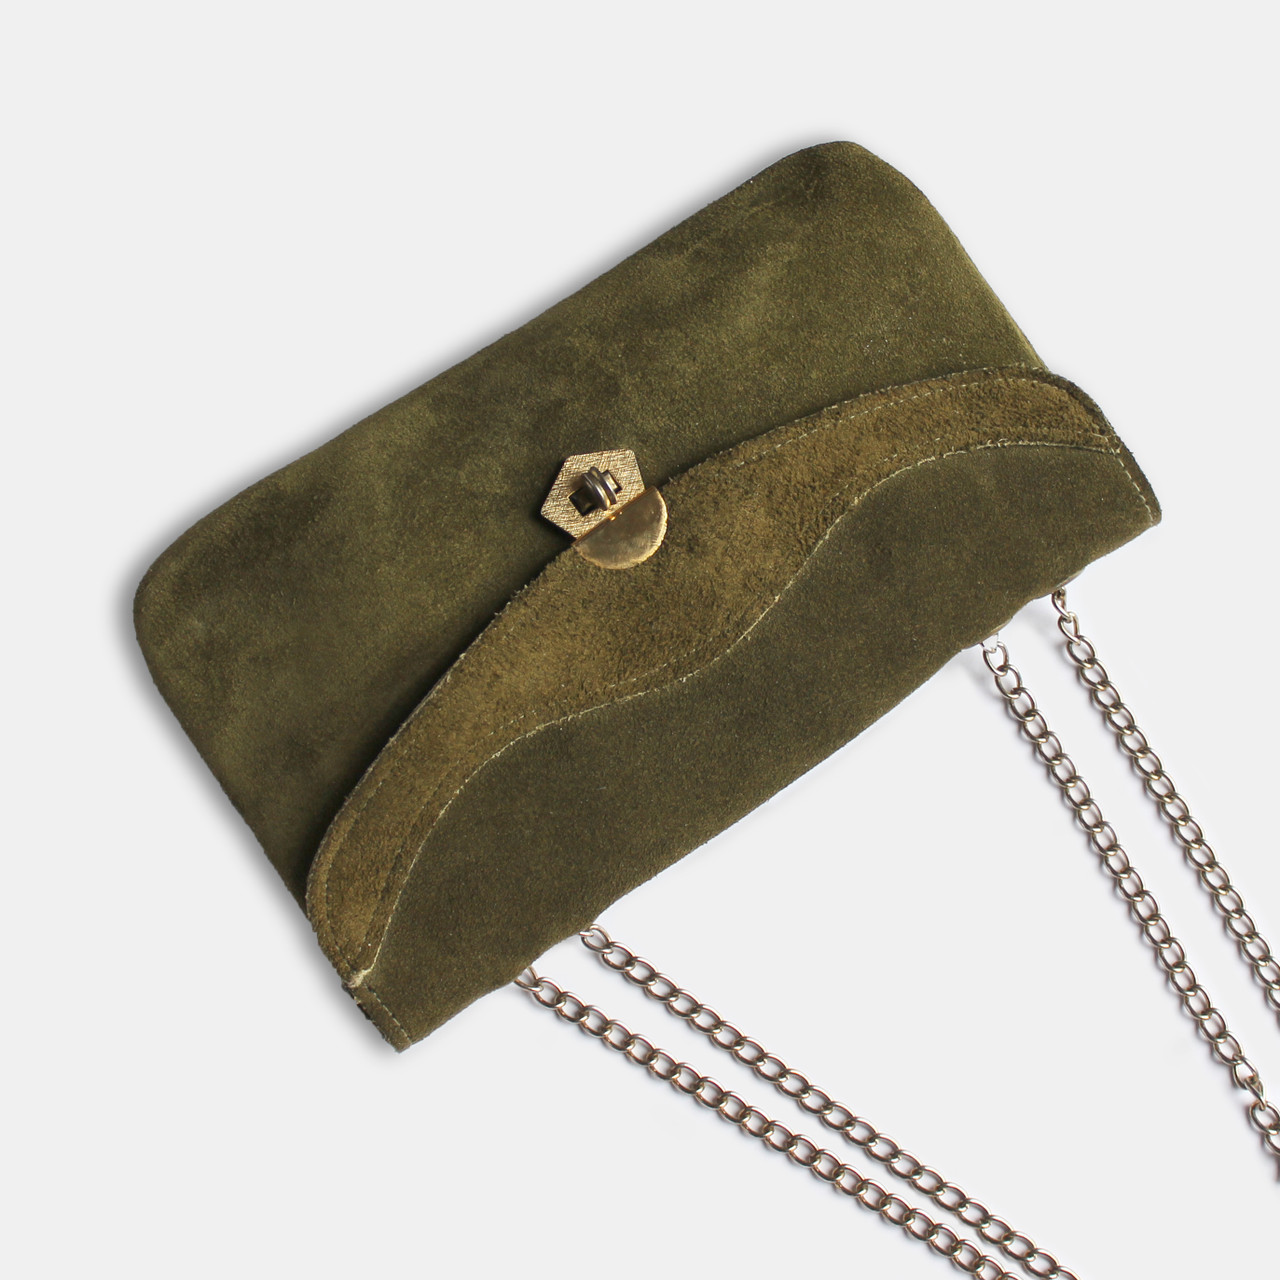 Suede Clutch Bags & Accessories – Will Bees Bespoke